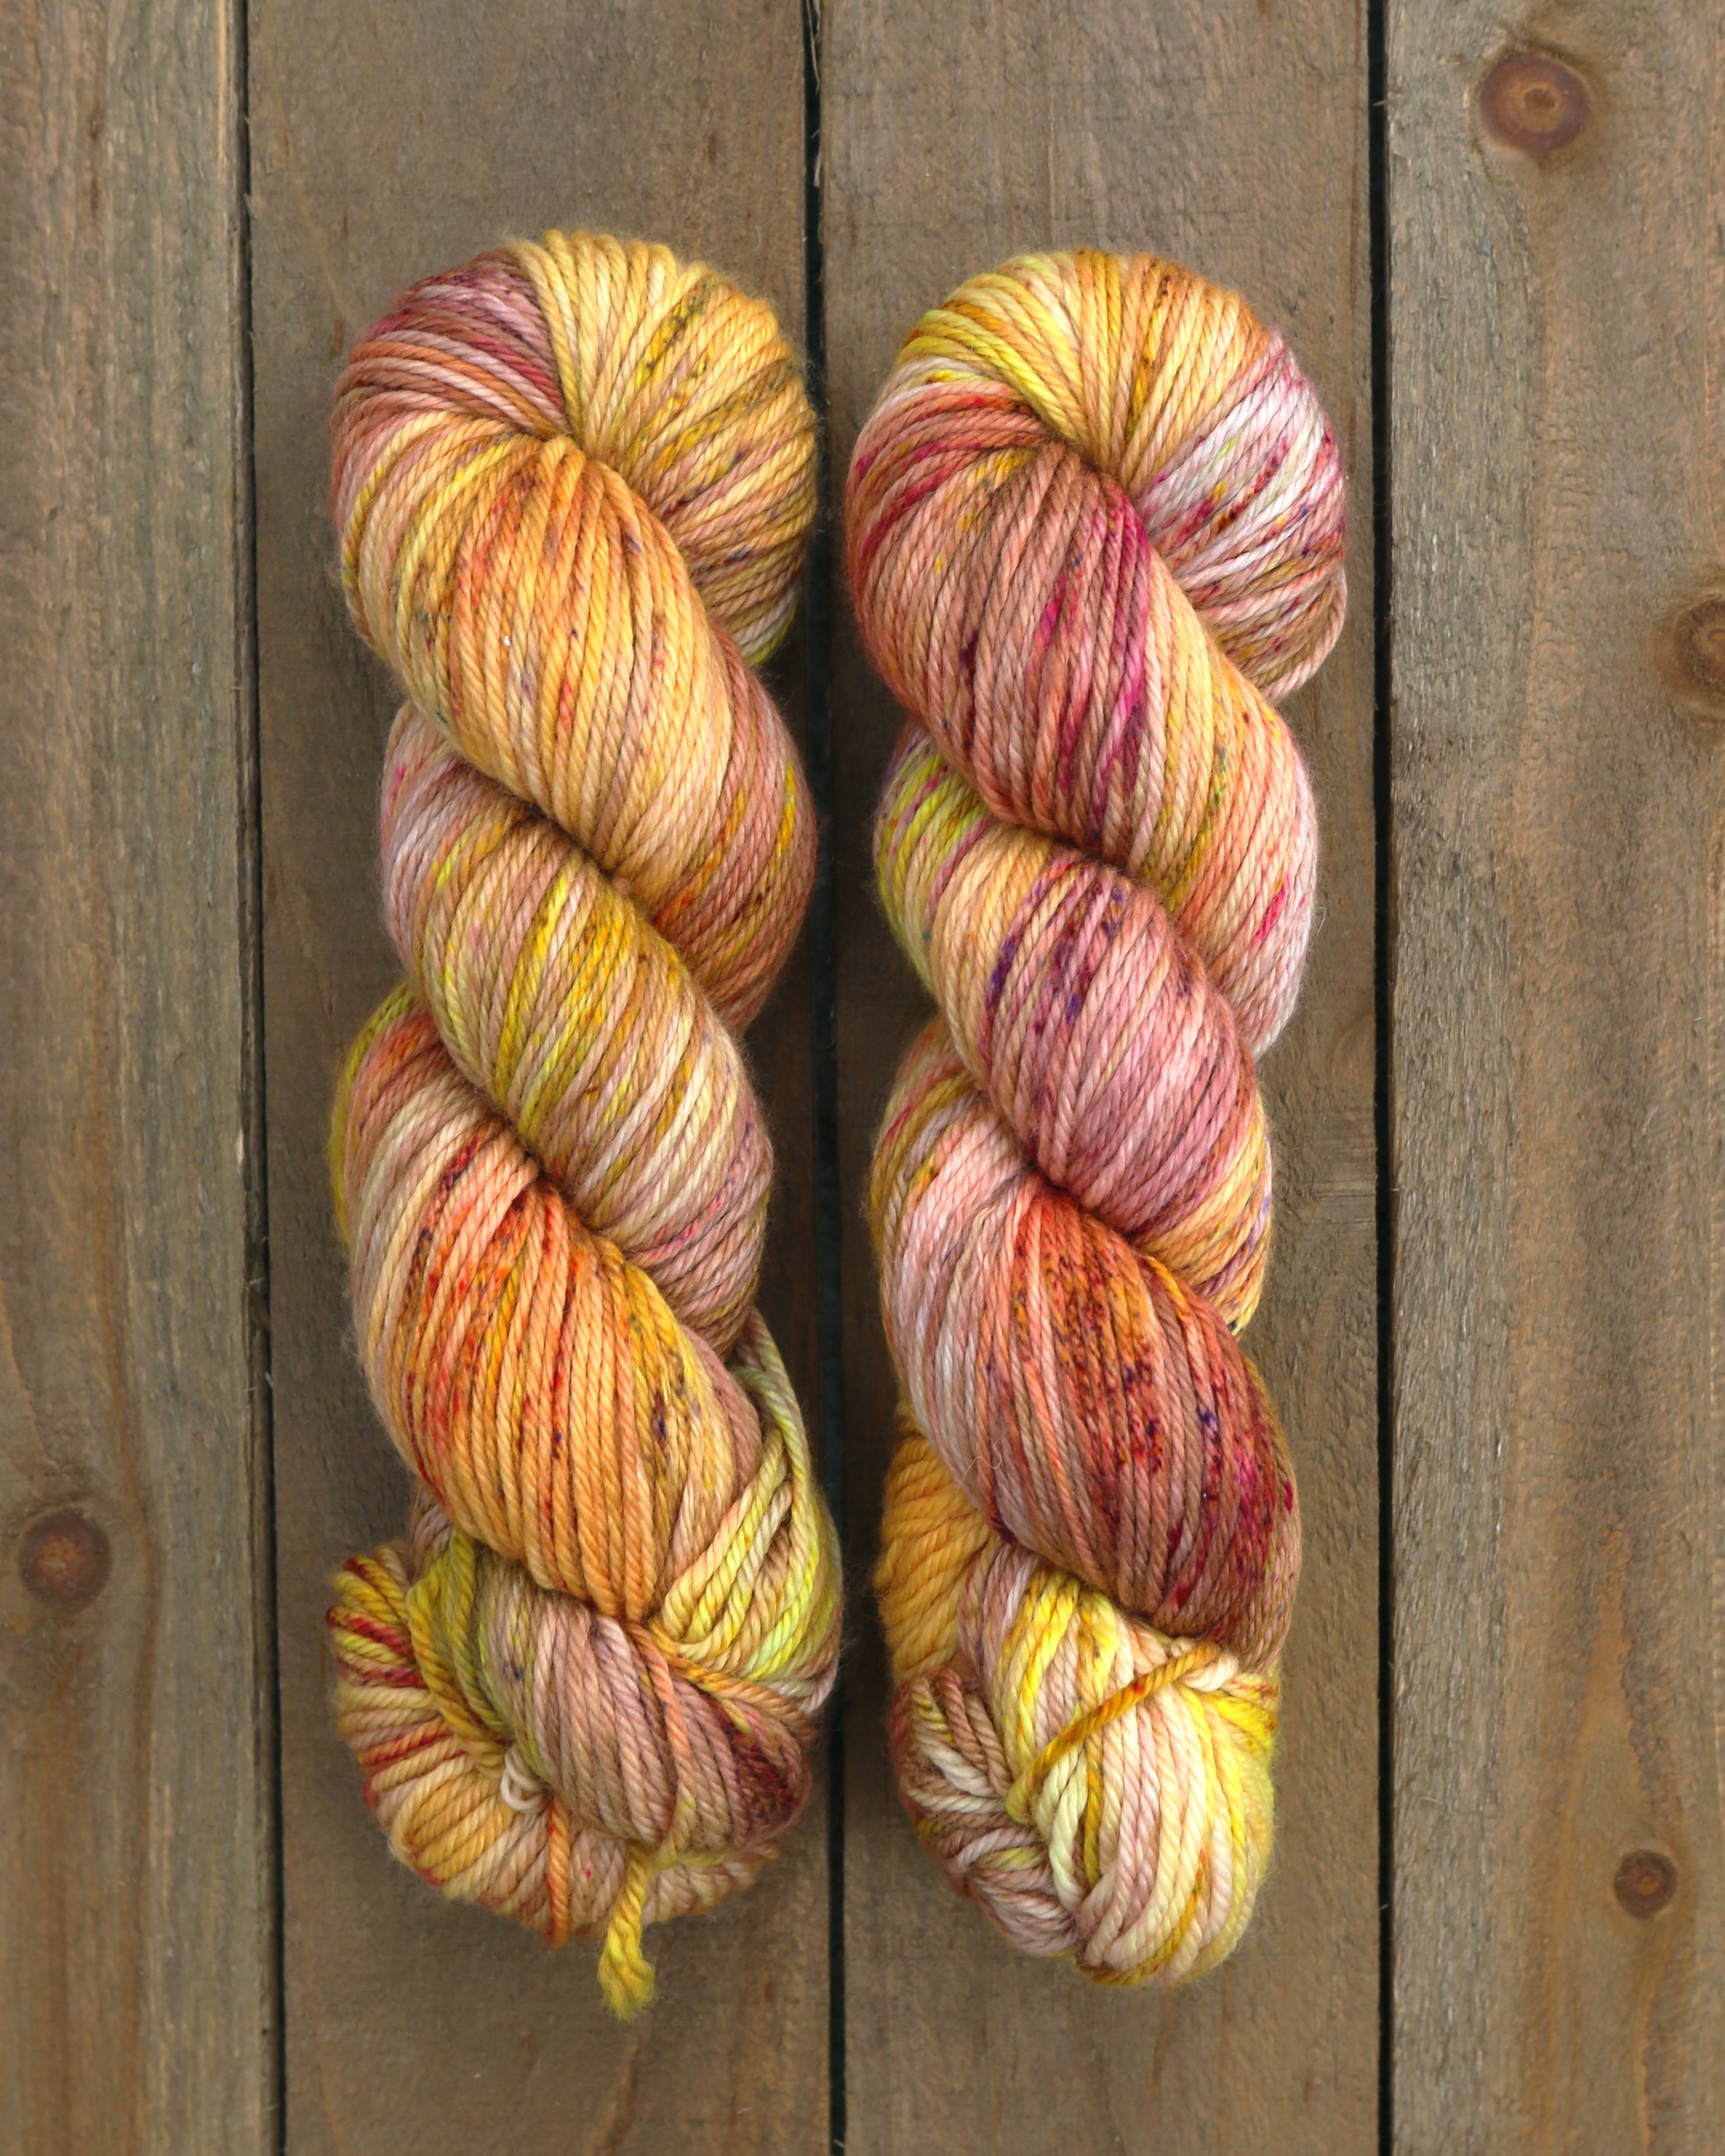 Merino Worsted - Patched Heart